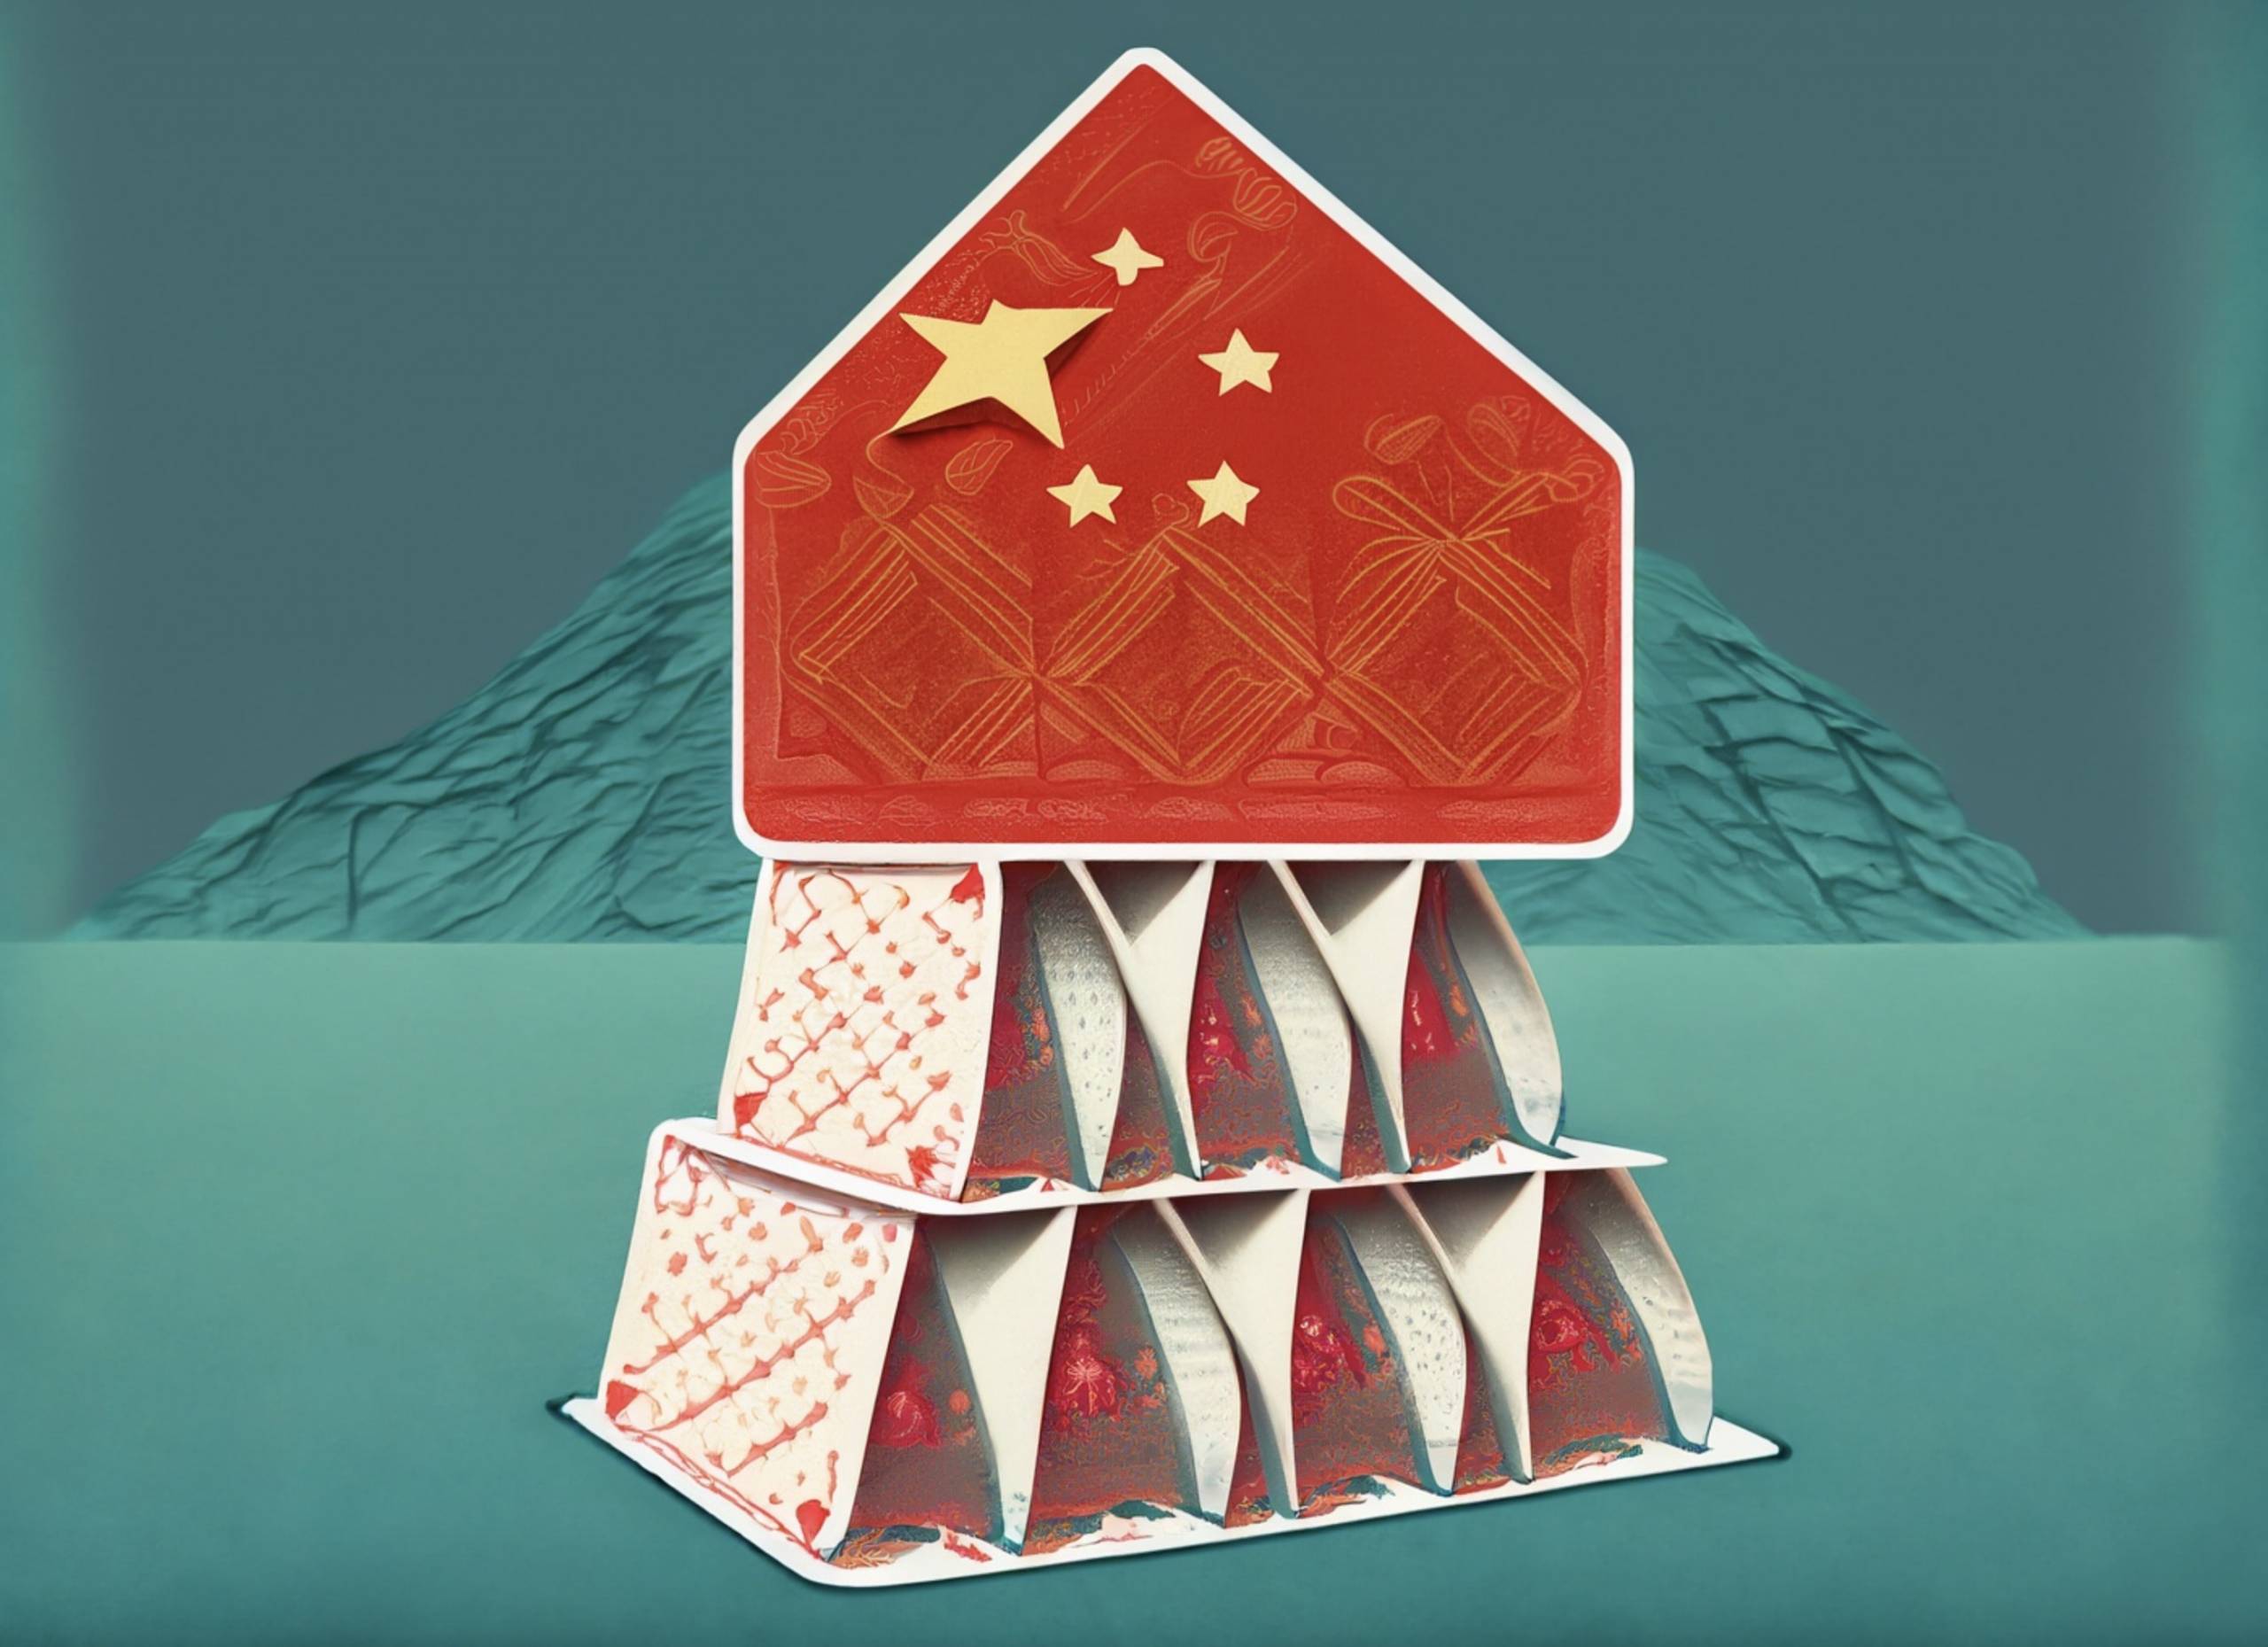 China: A House of Cards Waiting to Happen